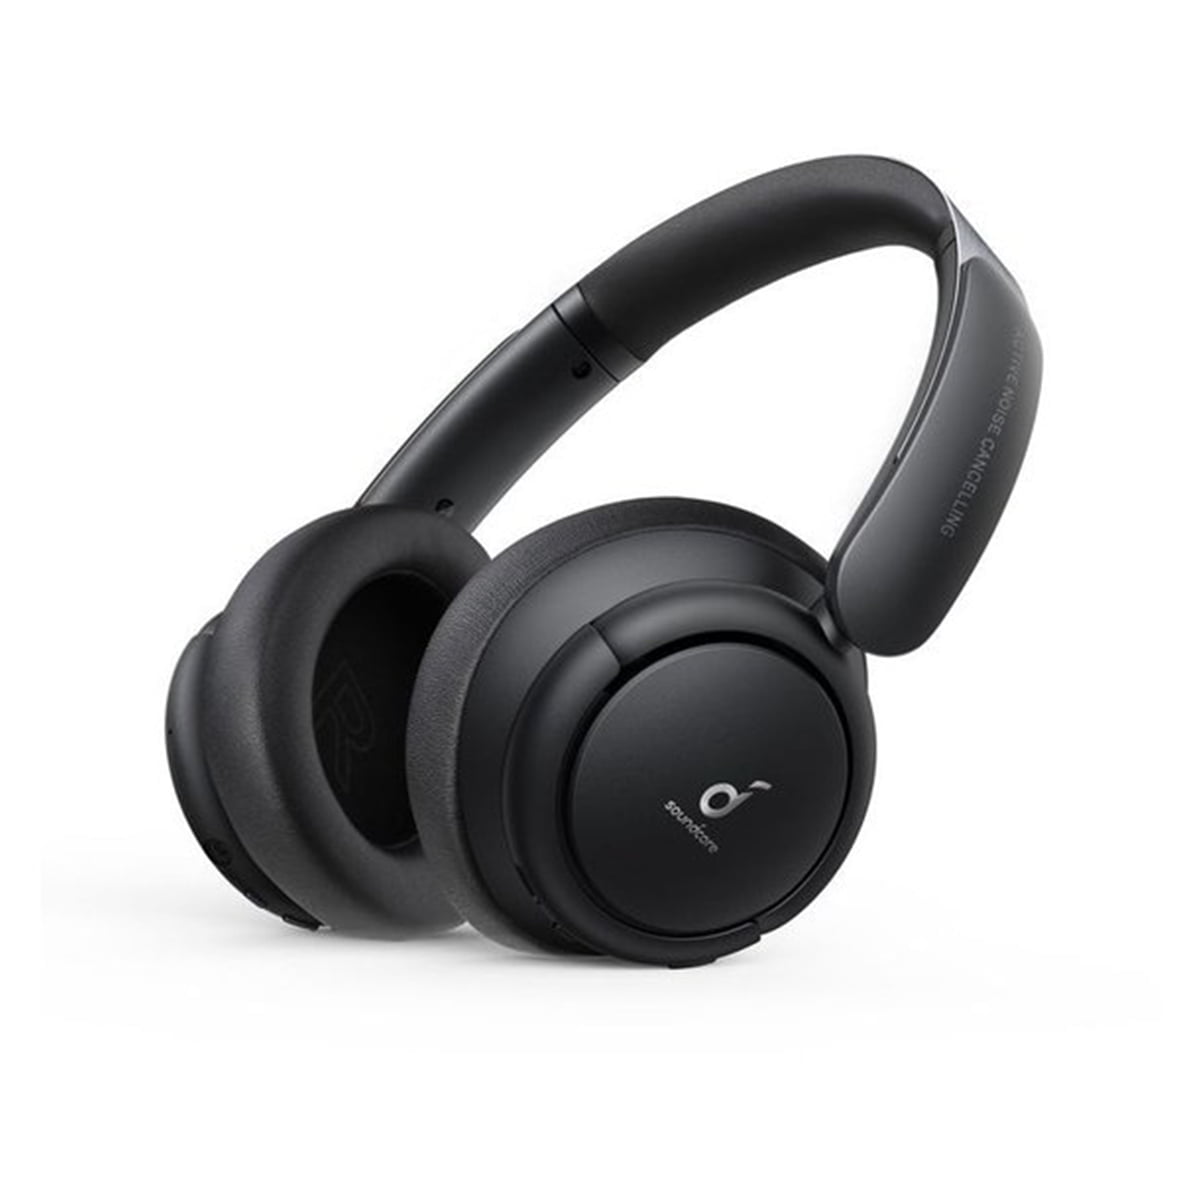 1811467 02 Soundcore &Lt;H1 Class=&Quot;Product-Name&Quot;&Gt;Anker  Soundcore Life Tune Wireless On Ear Headset Grey&Lt;/H1&Gt; &Lt;Ul&Gt; &Lt;Li&Gt;40Mm Drivers: Music Is Reproduced With Treble Up To 40Khz For Rich, Hi-Res Certified Sound With Enhanced Clarity&Lt;/Li&Gt; &Lt;Li&Gt;Multiple Noise Cancellation Modes: Life Tune Active Noise Cancelling Headphones Have 3 Noise Cancelling Modes: Transport, Outdoor, And Indoor. Block Out Engine Noise, Air-Conditioning, People Talking, And More To Allow You To Focus&Lt;/Li&Gt; &Lt;Li&Gt;Hybrid Active Noise Cancellation: Life Tune Uses External And Internal Microphones On Each Earcup, Plus A Digital Active Noise Cancellation Algorithm To Detect And Filter Out Up To 95% Of Low- And Mid-Frequency Sounds&Lt;/Li&Gt; &Lt;Li&Gt;Calls With Excellent Clarity: Your Voice Is Automatically Enhanced And Noise Reduced For Clear Calls&Lt;/Li&Gt; &Lt;Li&Gt;40-Hour Playtime: Life Tune Has 30% Longer Playtime Than Standard Over-Ear Headphones. Charge For 5 Minutes And Enjoy 4 Hours Of Playtime&Lt;/Li&Gt; &Lt;/Ul&Gt; &Lt;Pre&Gt;Anker Product Warranty&Lt;/Pre&Gt; &Lt;Pre&Gt;&Lt;B&Gt;We Also Provide International Wholesale And Retail Shipping To All Gcc Countries: Saudi Arabia, Qatar, Oman, Kuwait, Bahrain.&Lt;/B&Gt;&Lt;/Pre&Gt; Headphones Anker Soundcore Life Tune Wireless Headphones A3029Ha1